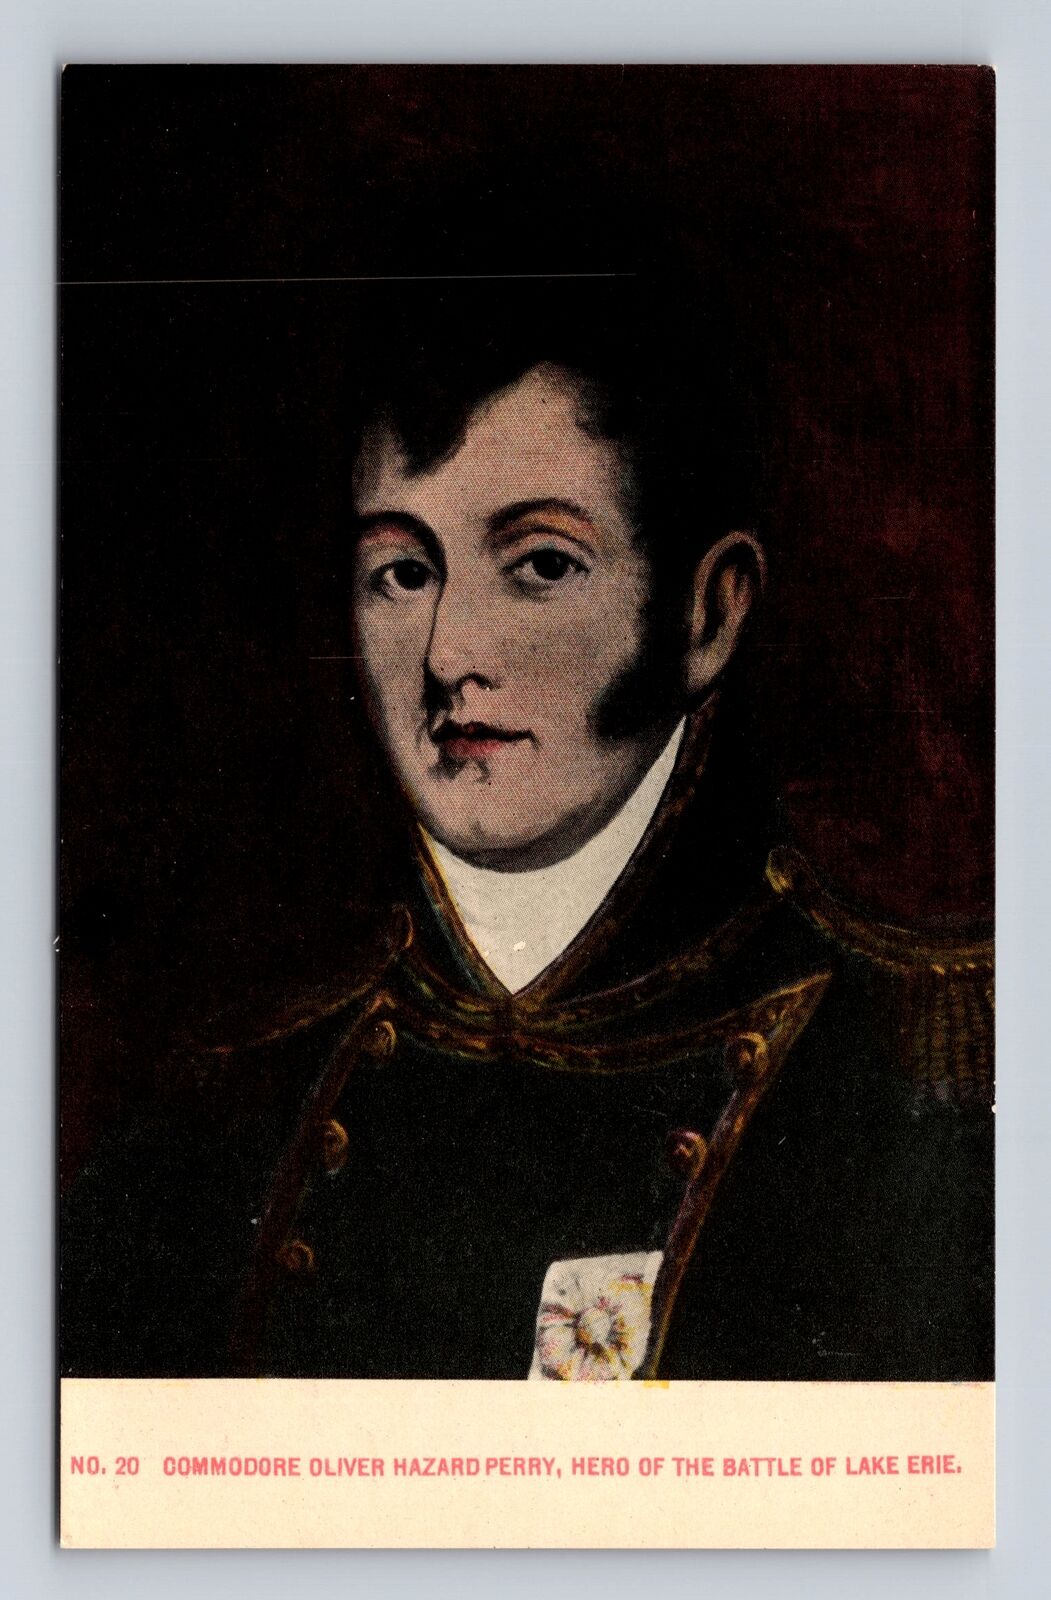 Commodore Oliver Hazard Perry, Hero of the Battle of Lake Erie, Vintage Postcard